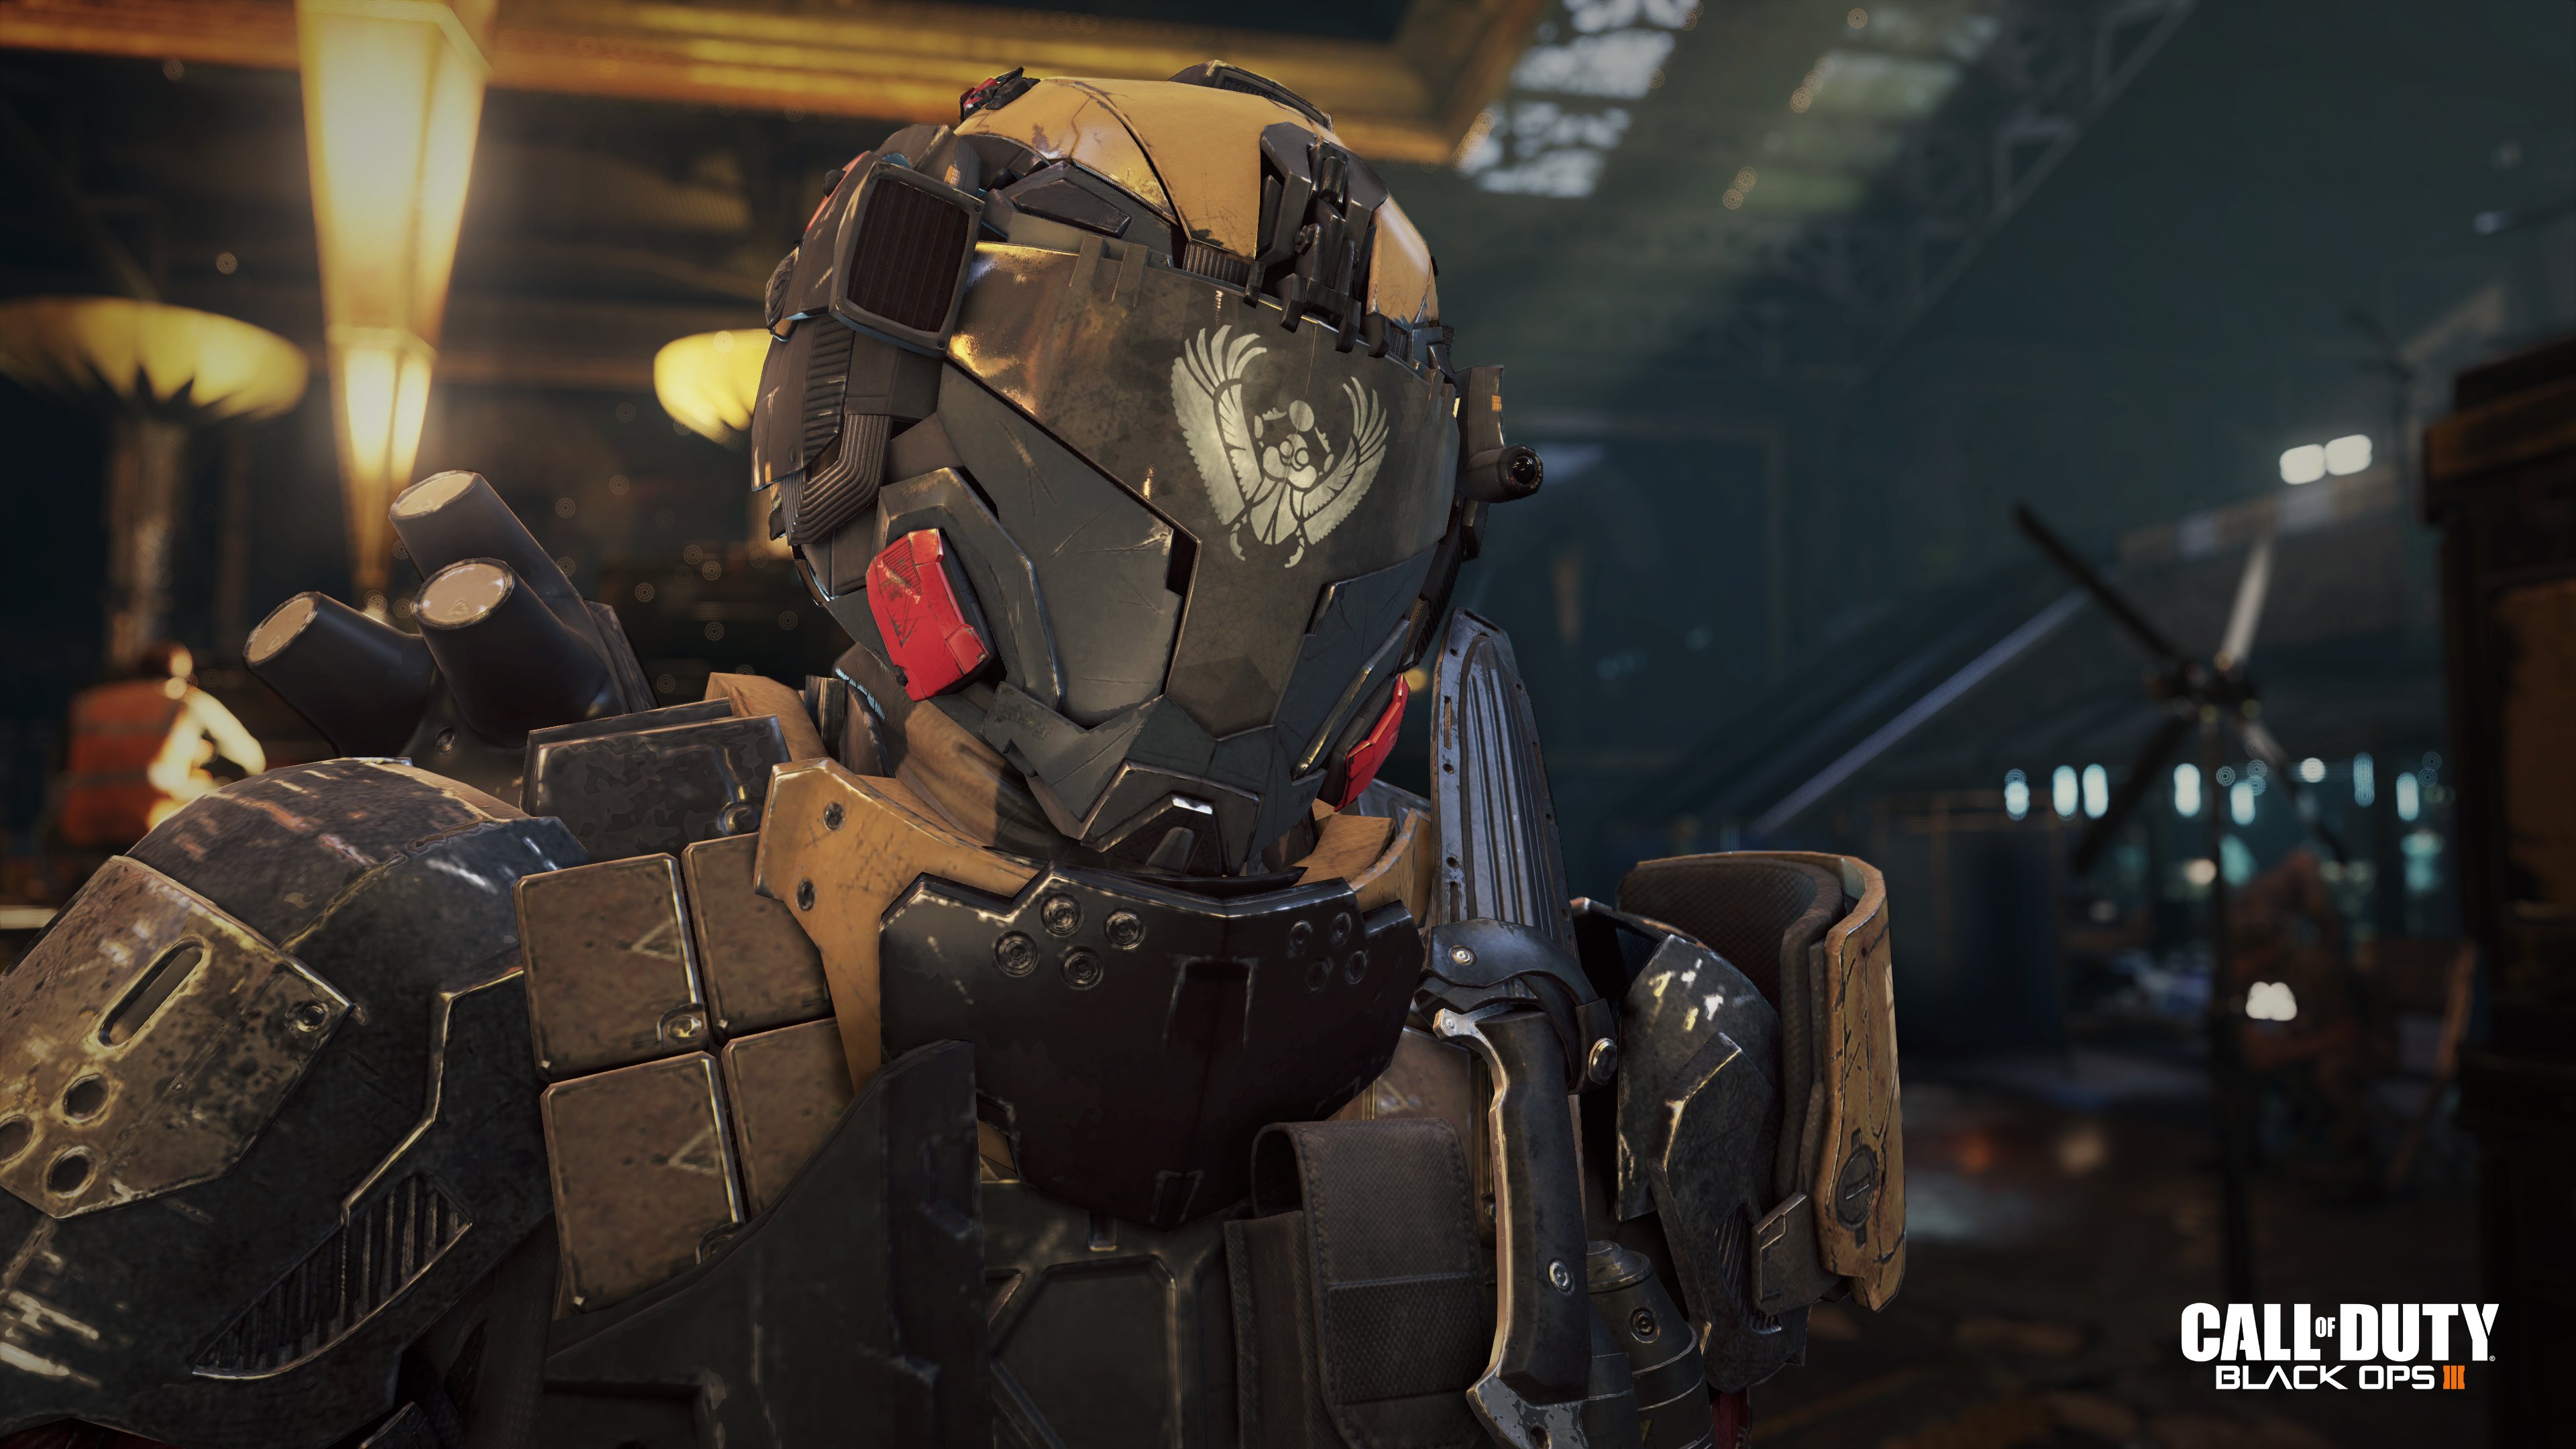 Find out why the Call of Duty: Black Ops 3 release date is on a Friday.